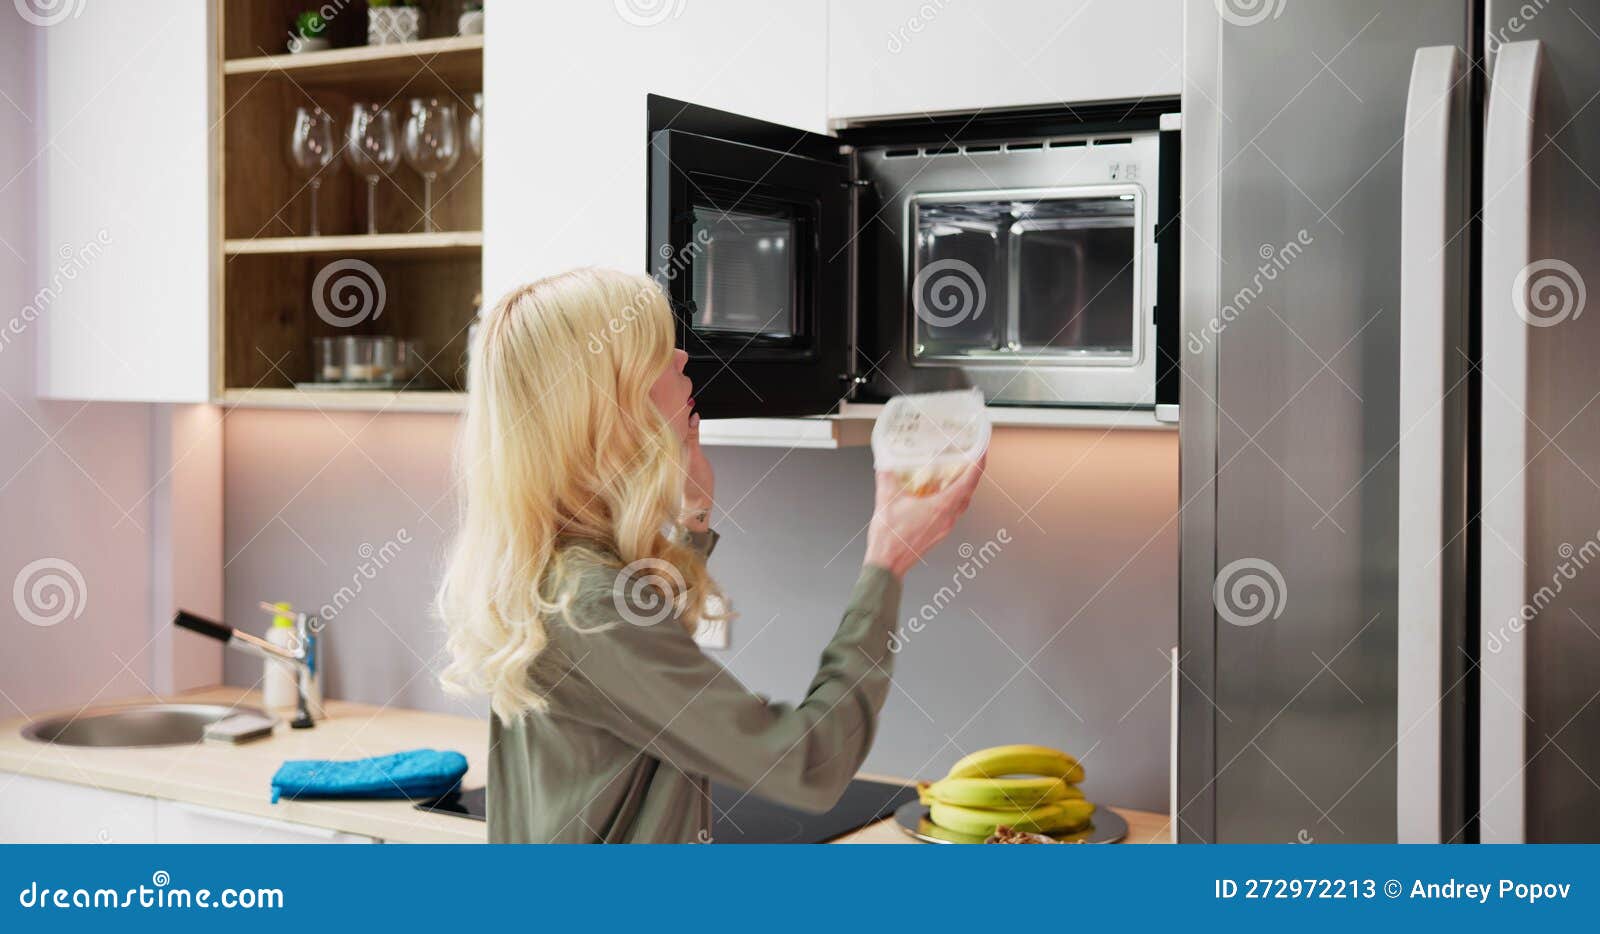 woman using microwave oven for heating food